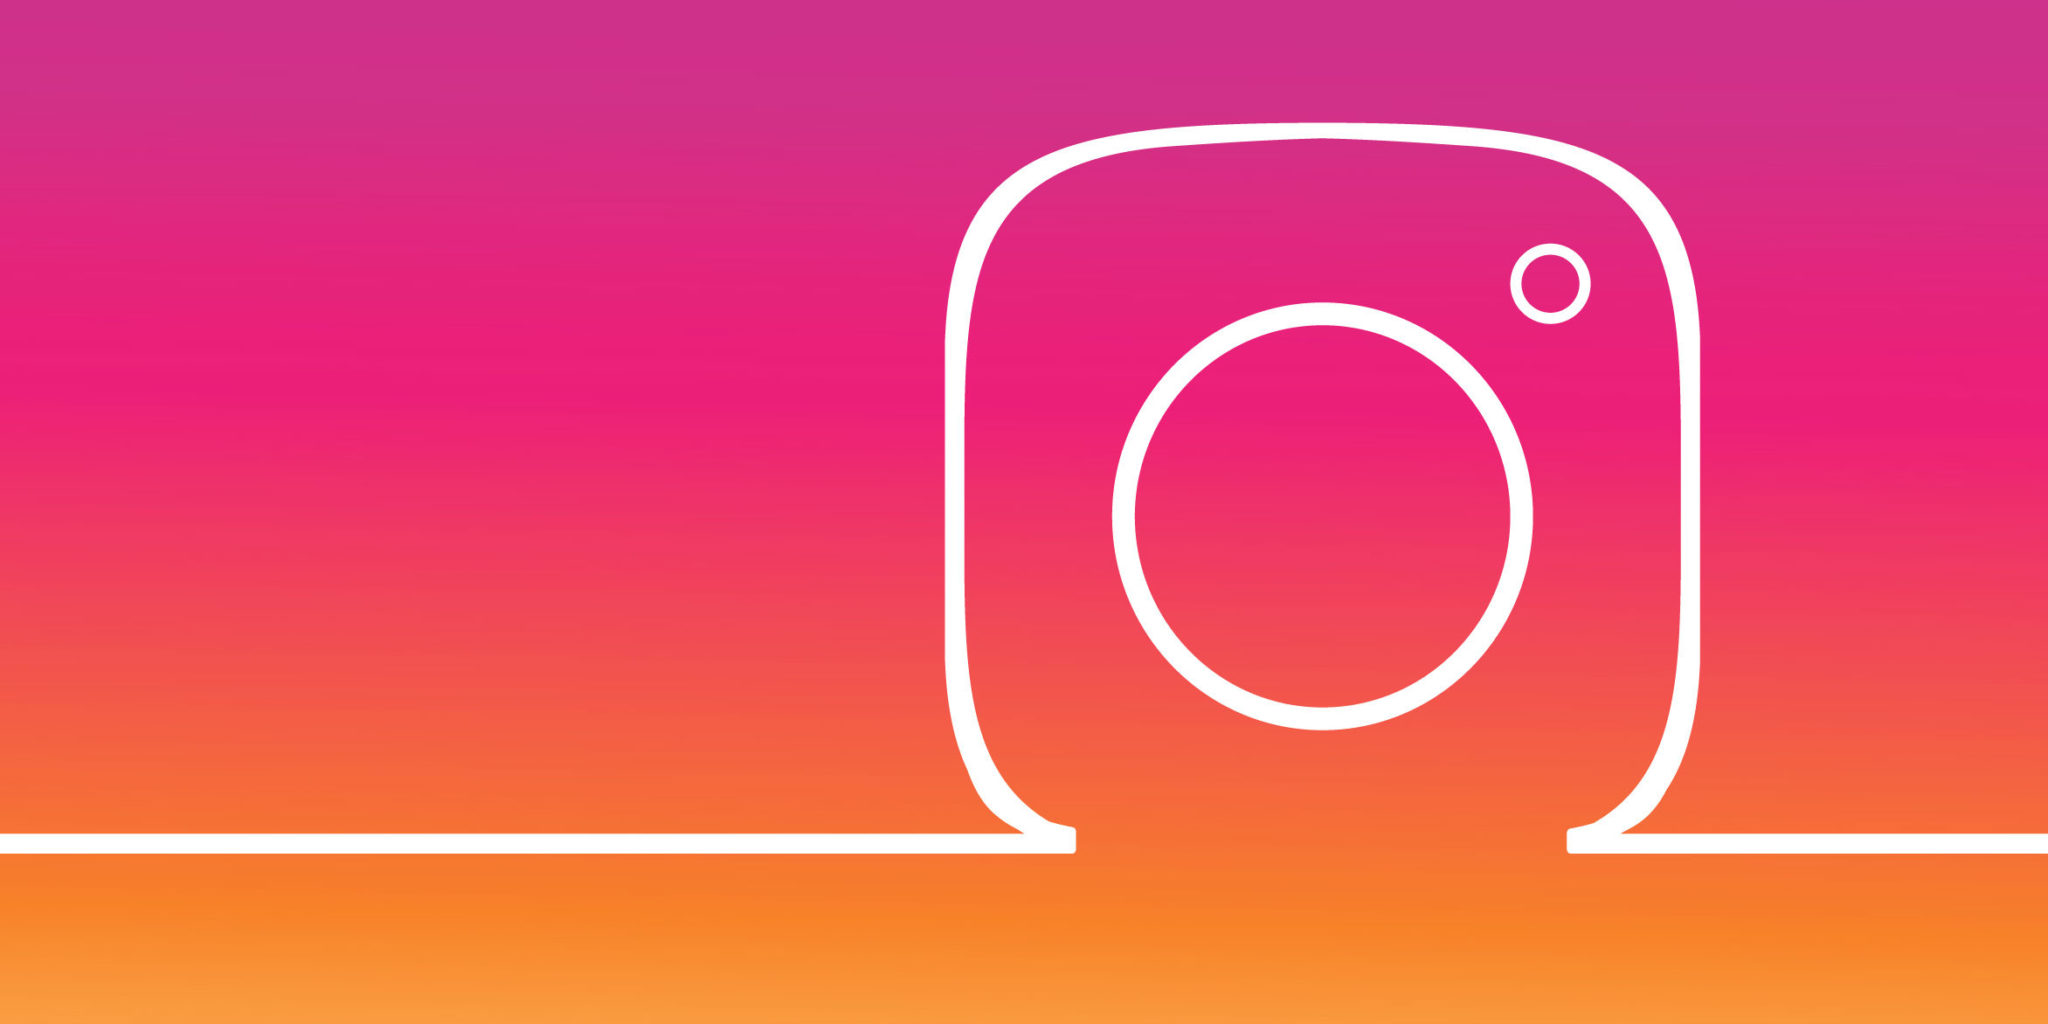 Instagram turns to machine learning to proactively combat bullying